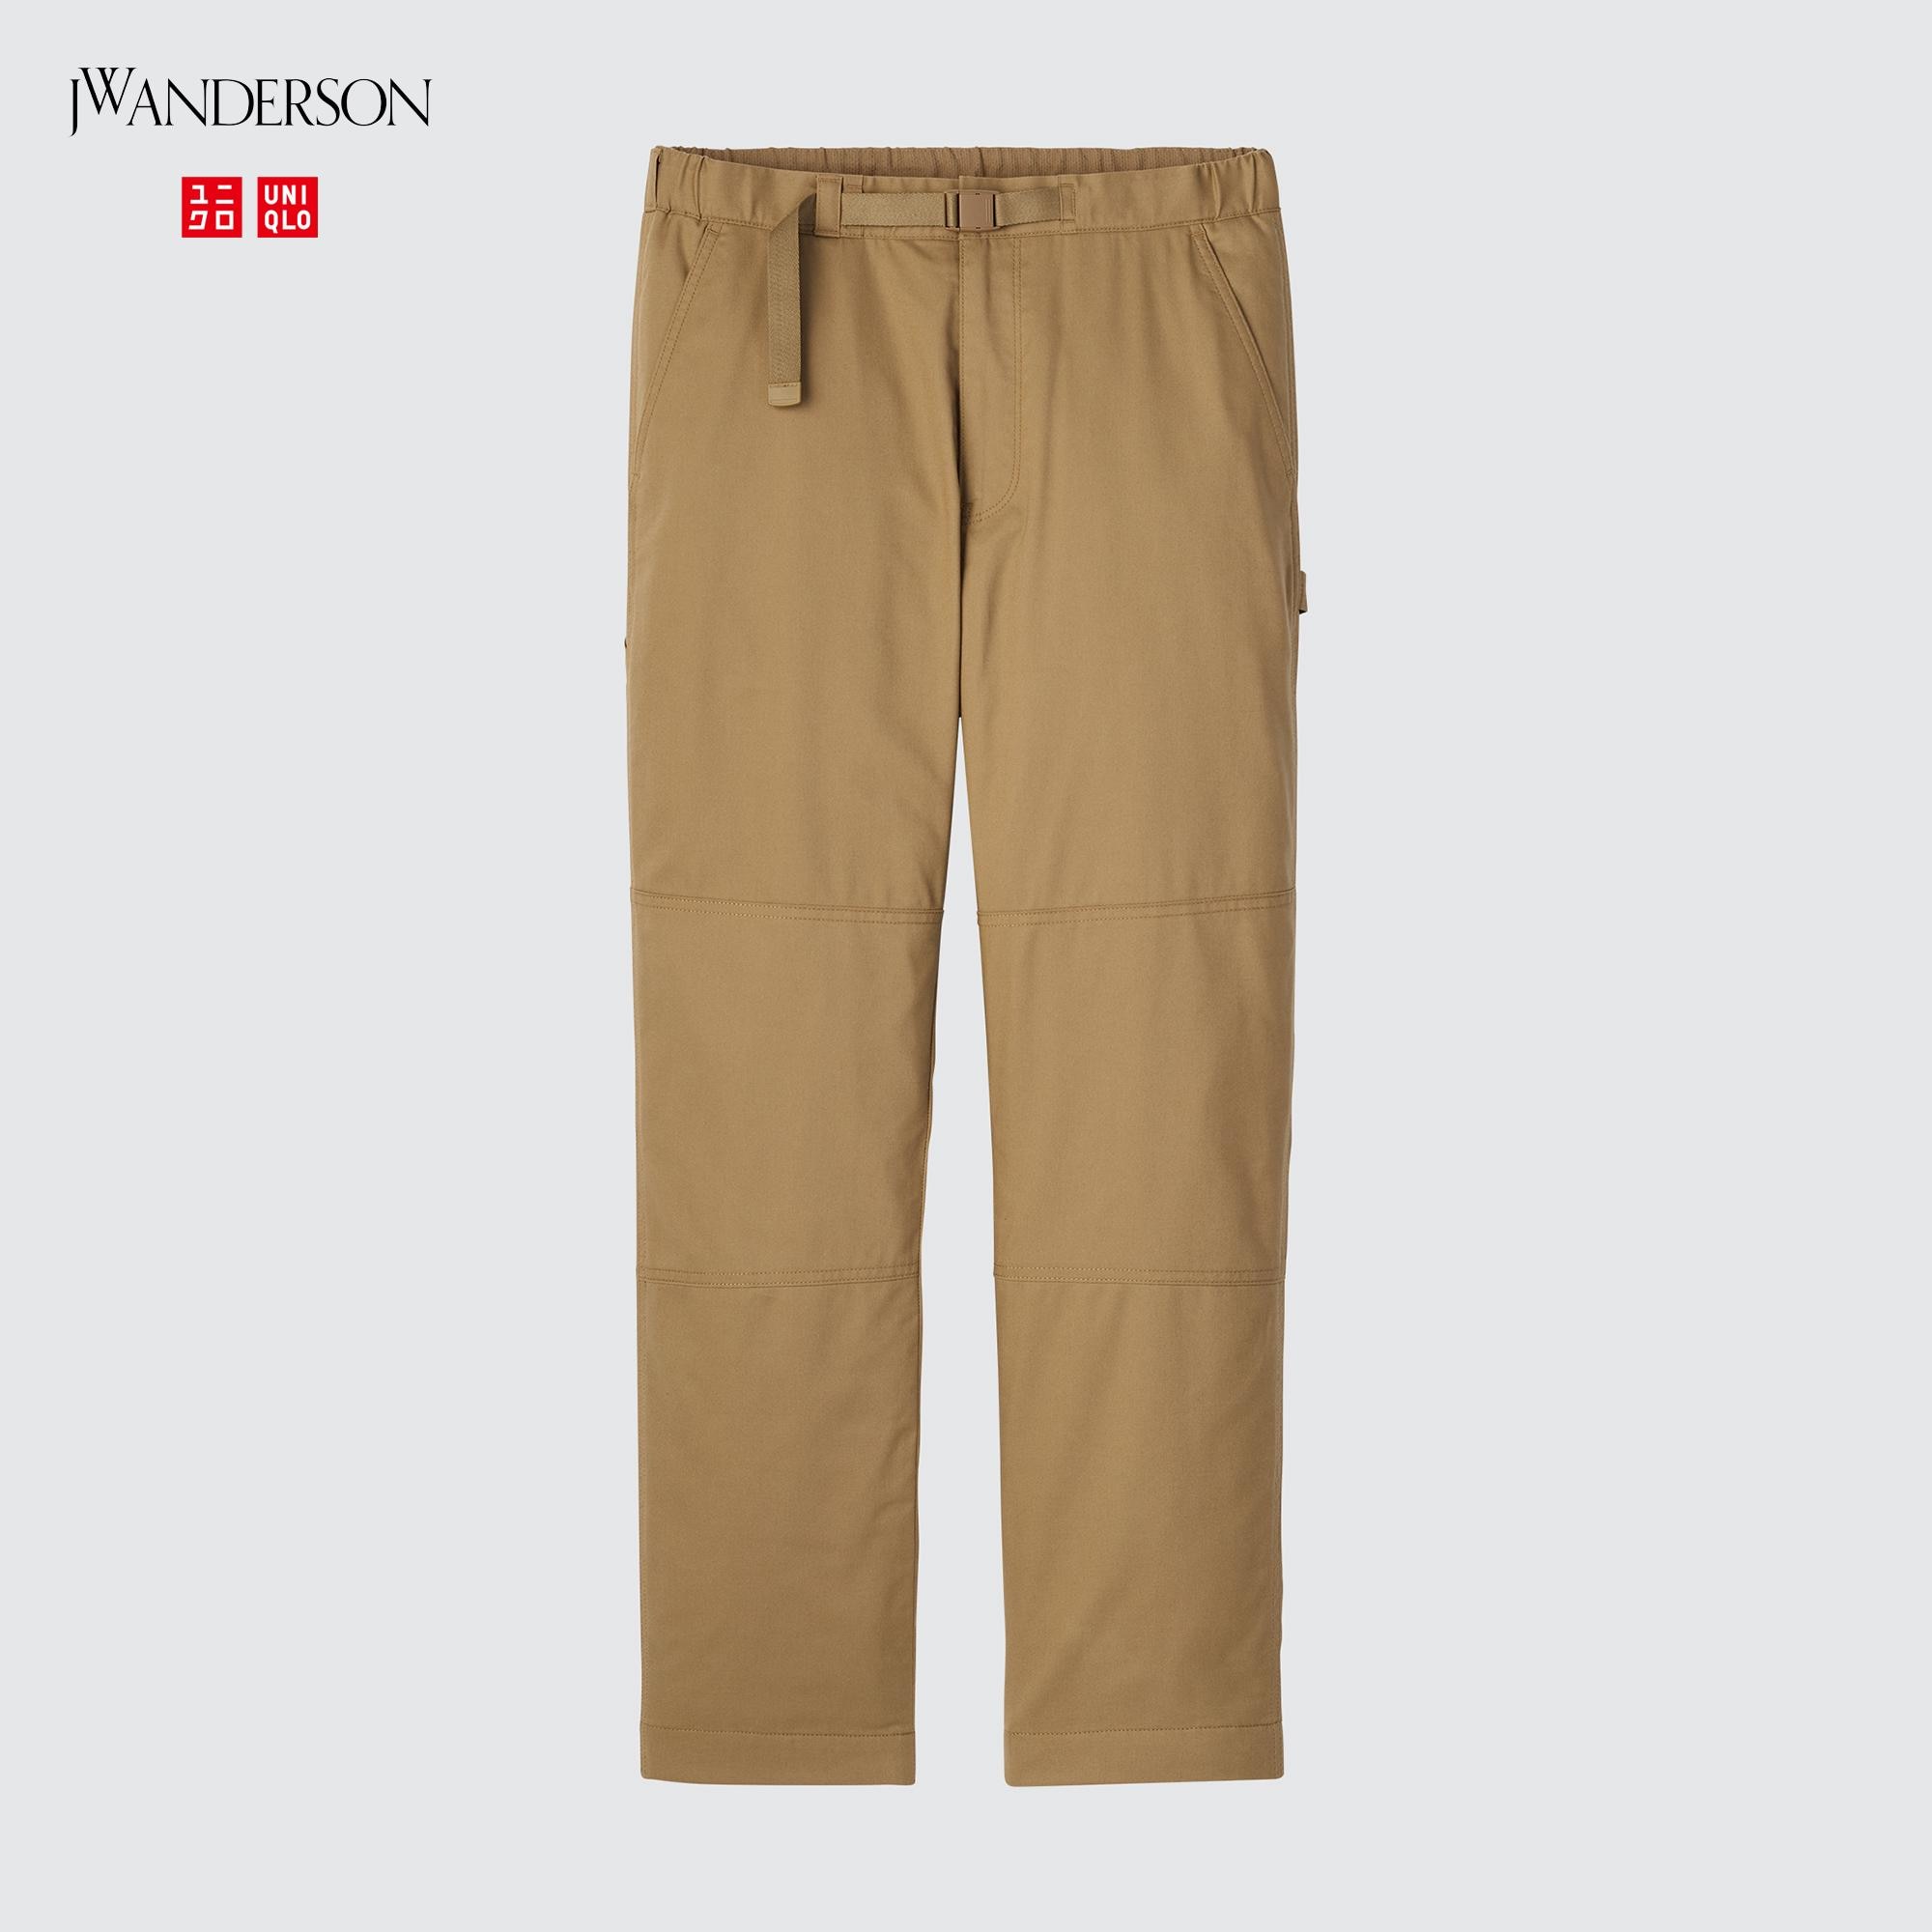 Uniqlo Singapore  Finally a pair of pants that will keep you warm and  looking your best during your AutumnWinter travels Made with a  threelayered construction which includes a windproof film and